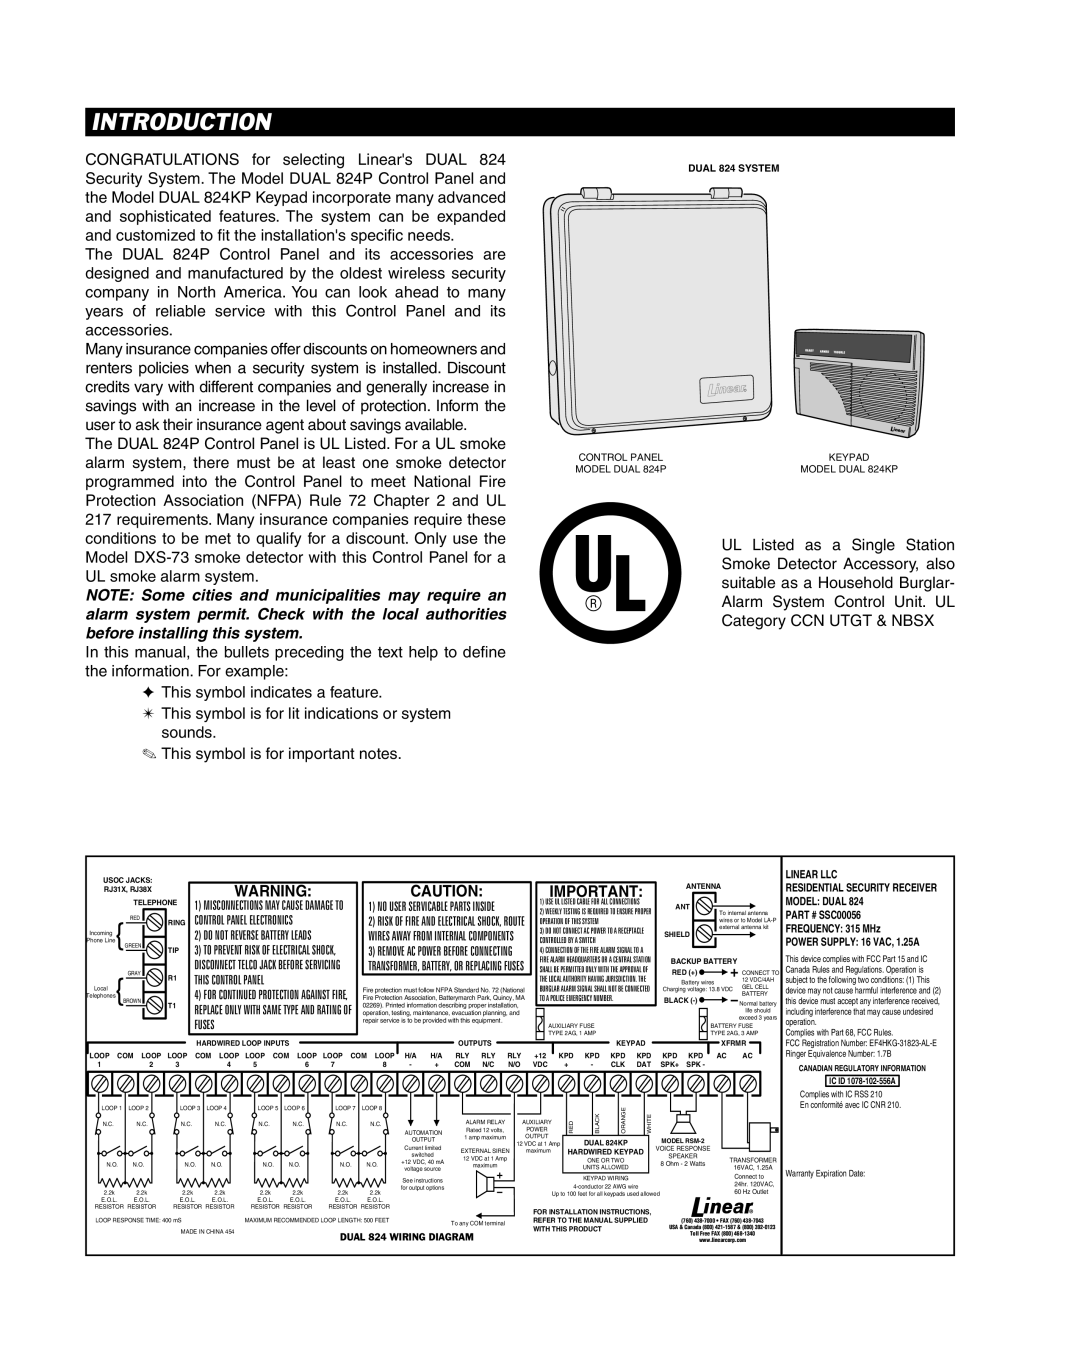 Linear DUAL 824 manual Introduction 